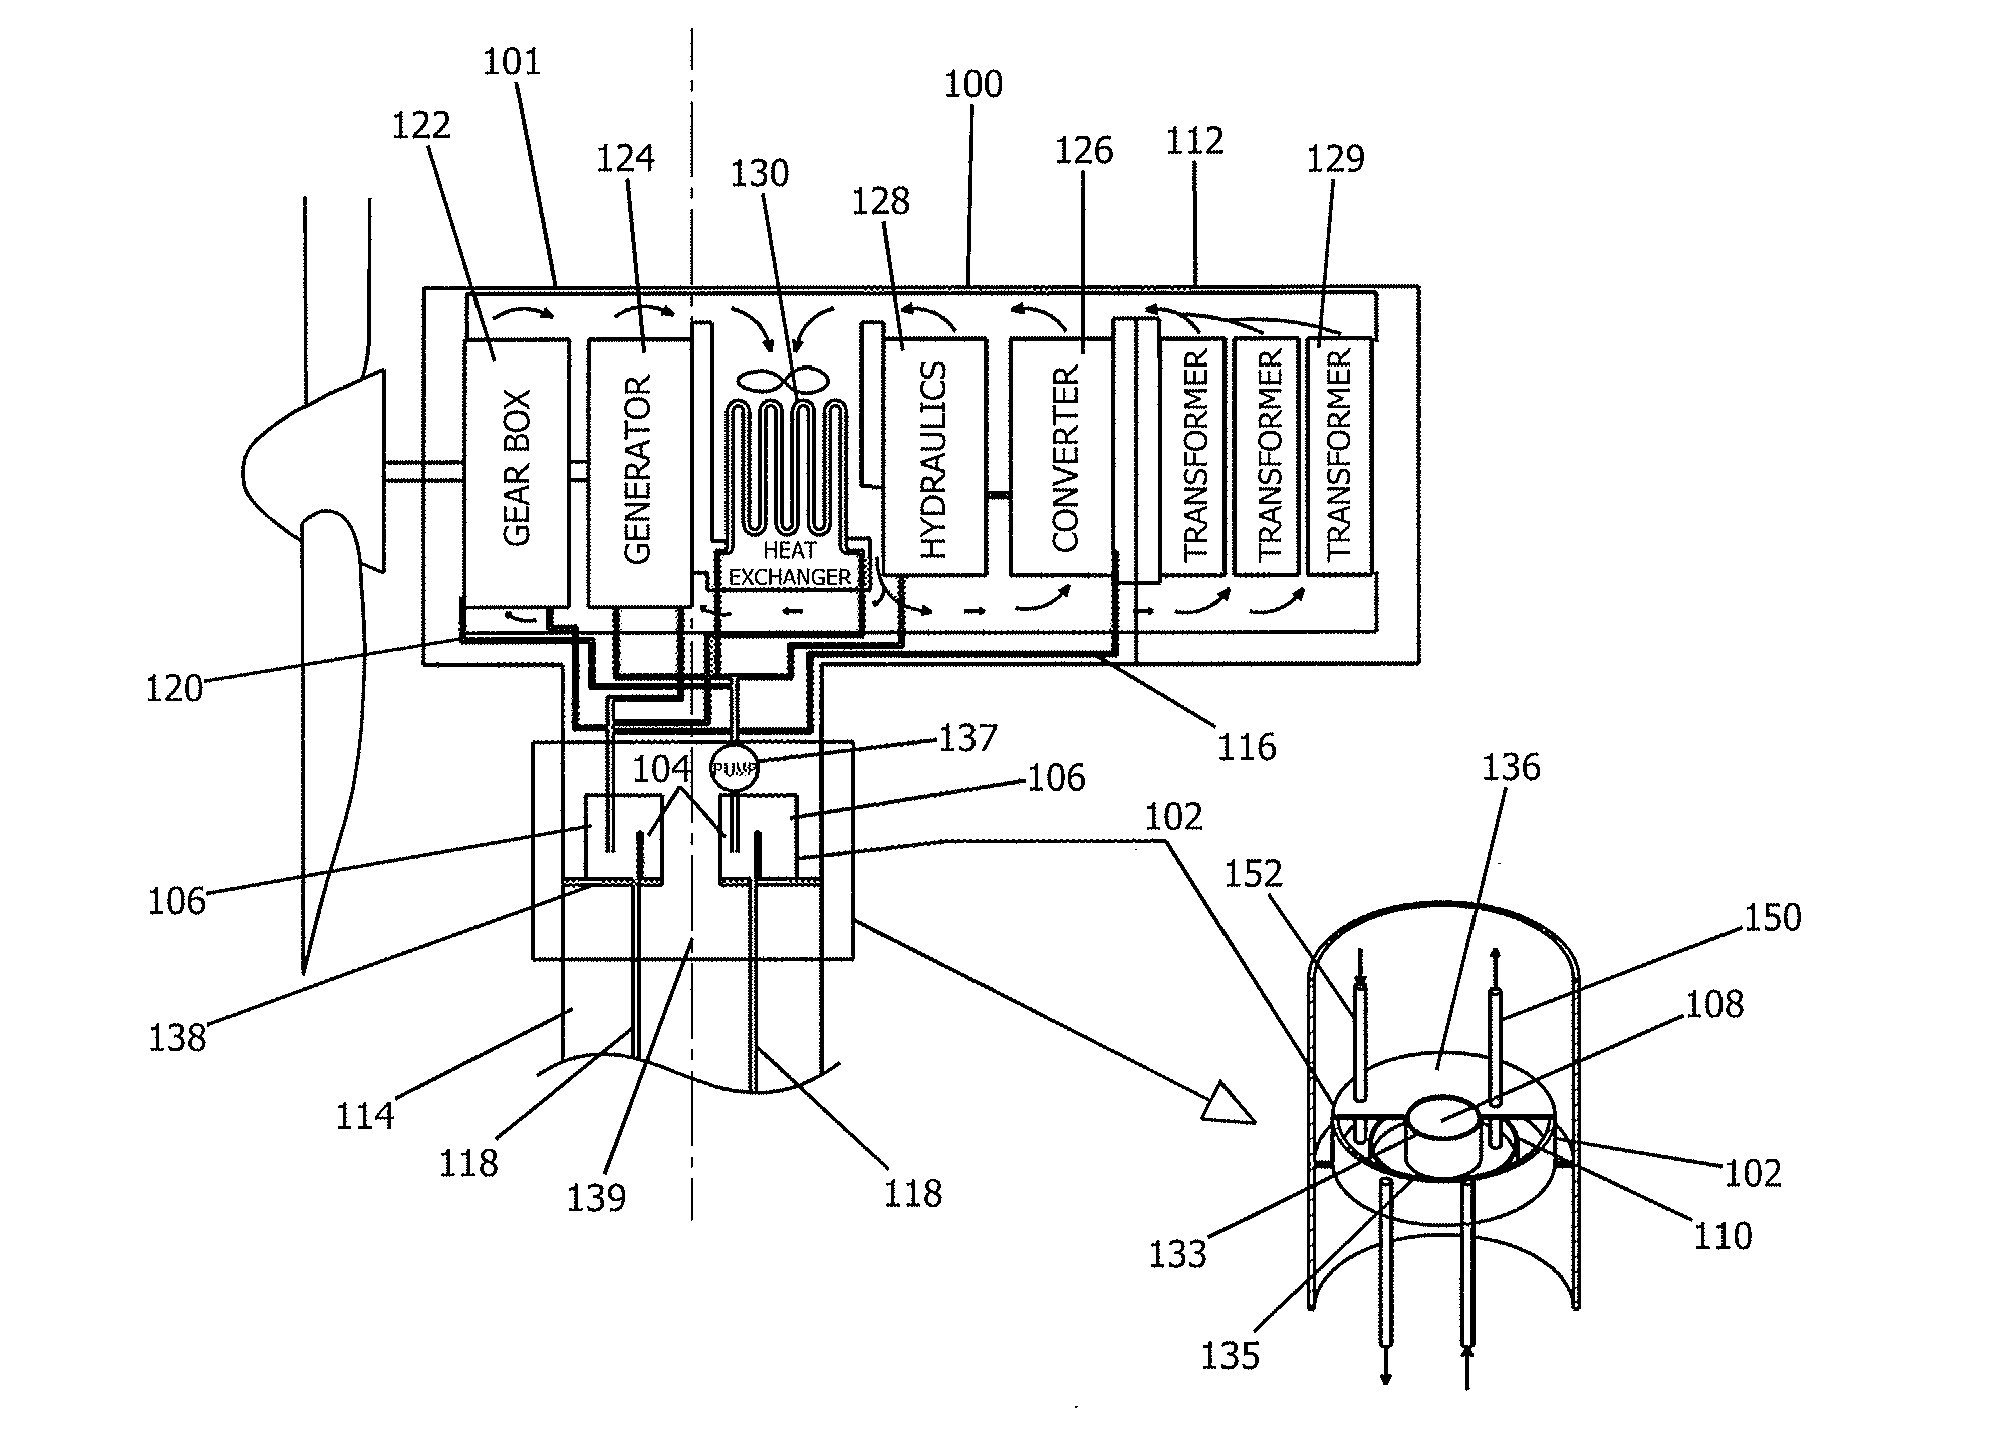 Integrated cooling and climate control system for an offshore wind turbine